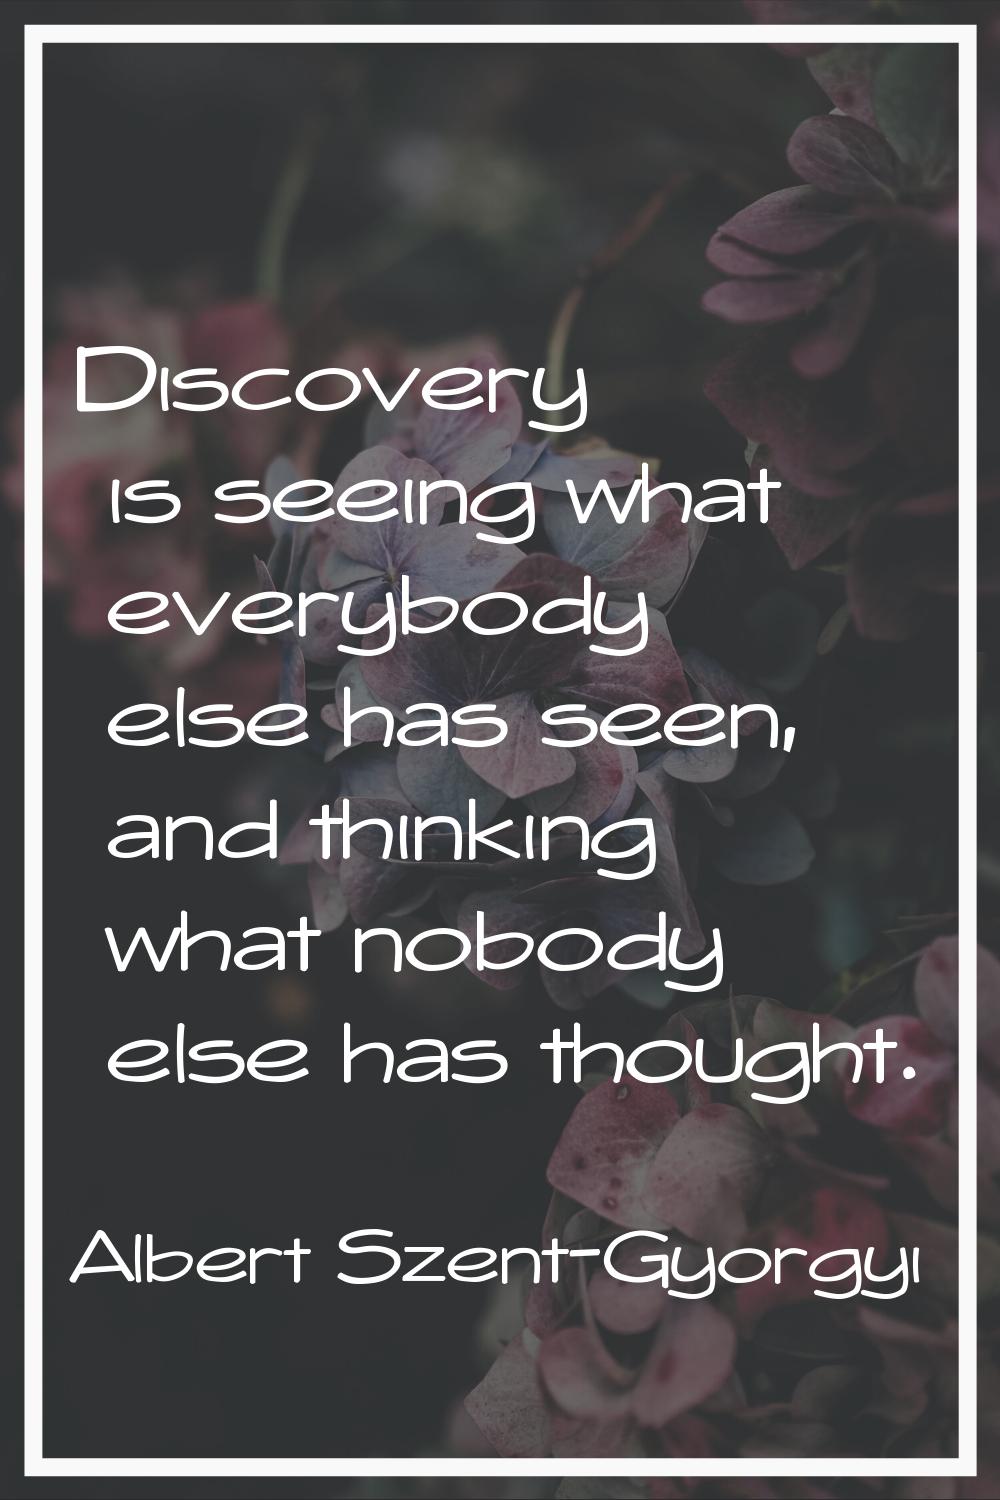 Discovery is seeing what everybody else has seen, and thinking what nobody else has thought.